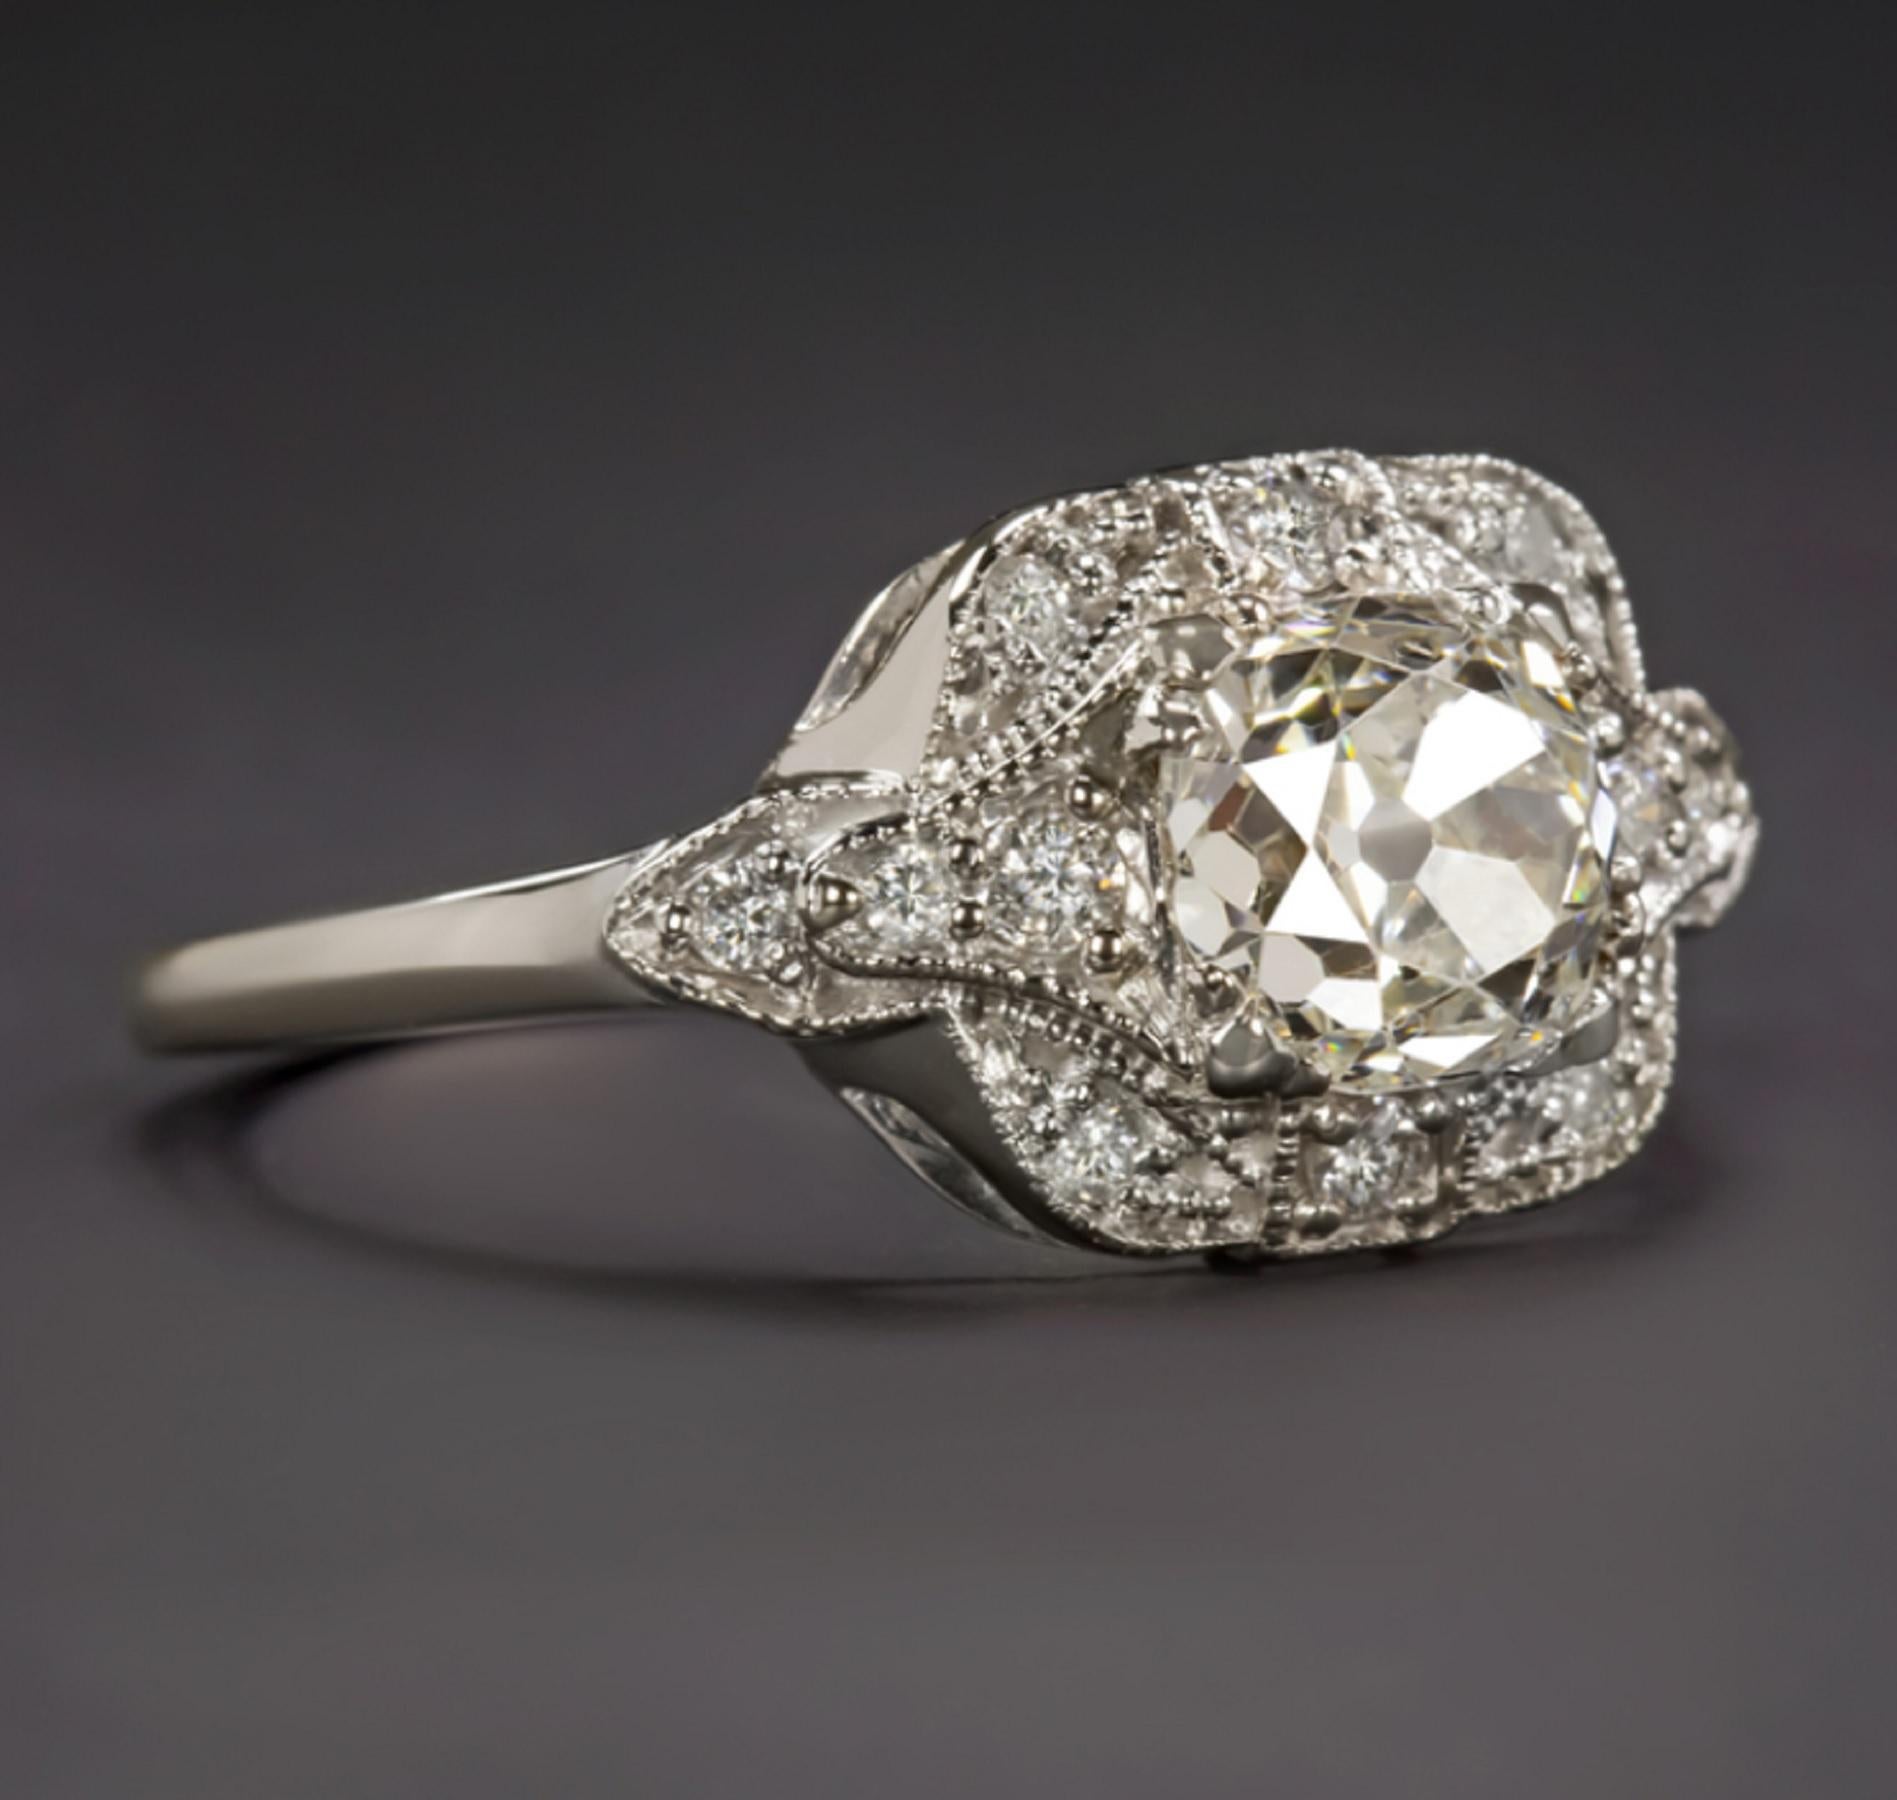 A stunning vintage engagement ring features a vibrant GIA certified old mine cut diamond complemented by an elegantly designed diamond studded setting. Cut by hand well over 100 years in the past, the 1.17ct center diamond has a gorgeous chunky cut